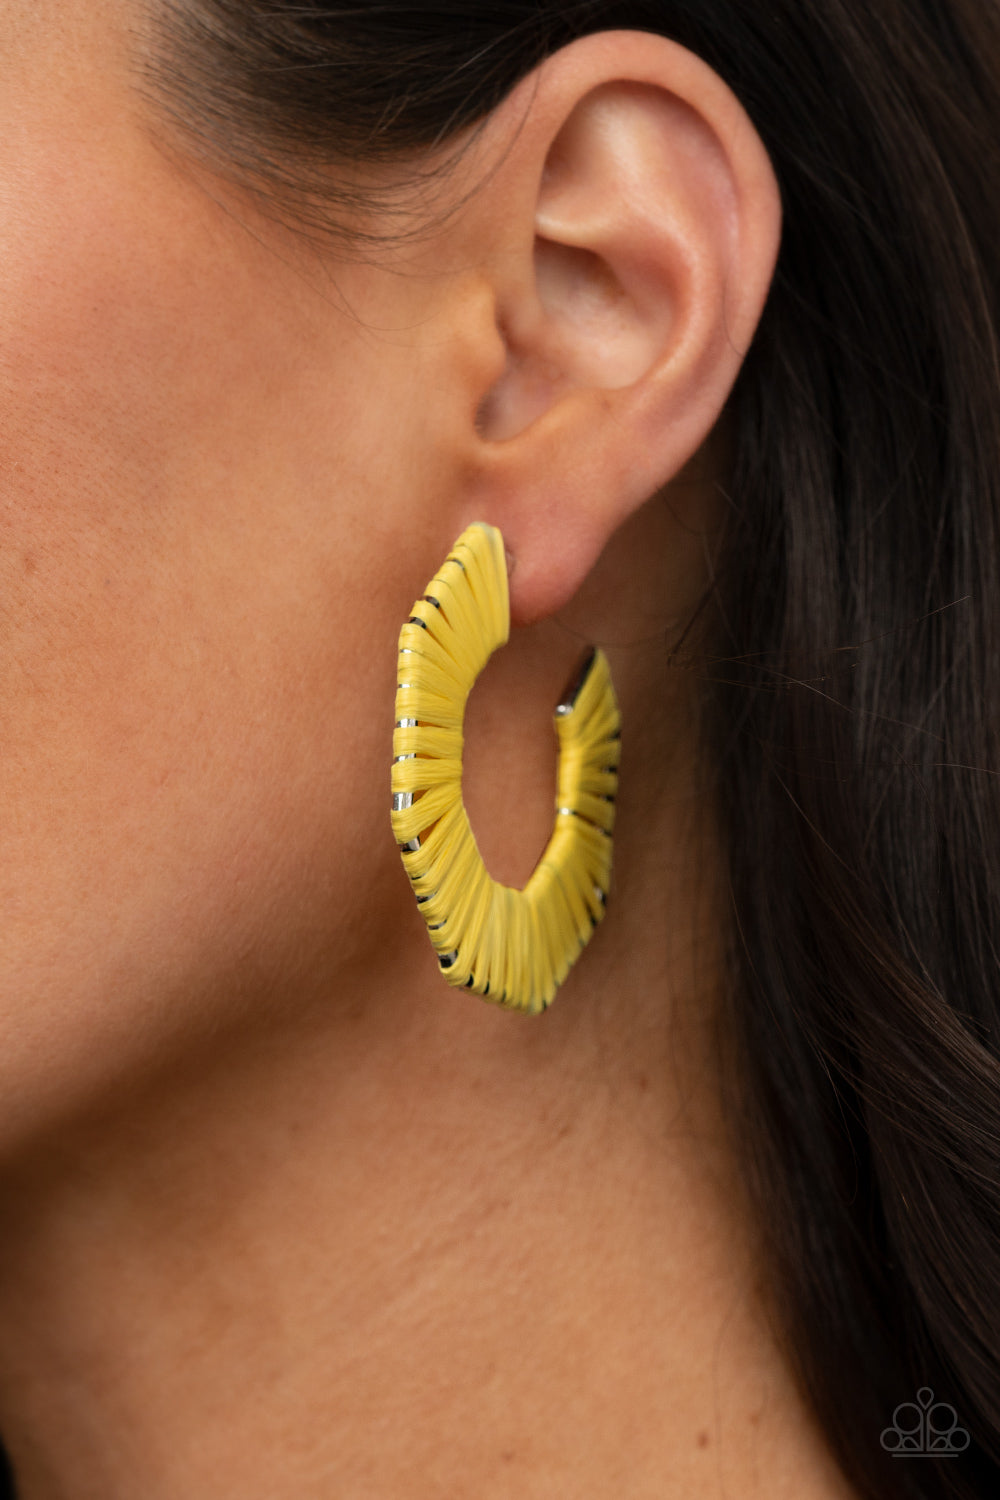 Fabulously Fiesta Yellow Hoop Earring - Paparazzi Accessories  Illuminating wicker-like cording is wrapped around a hexagonal hoop, creating a colorful pop of color. Earring attaches to a standard post fitting. Hoop measures approximately 2" in diameter.  All Paparazzi Accessories are lead free and nickel free!  Sold as one pair of hoop earrings.